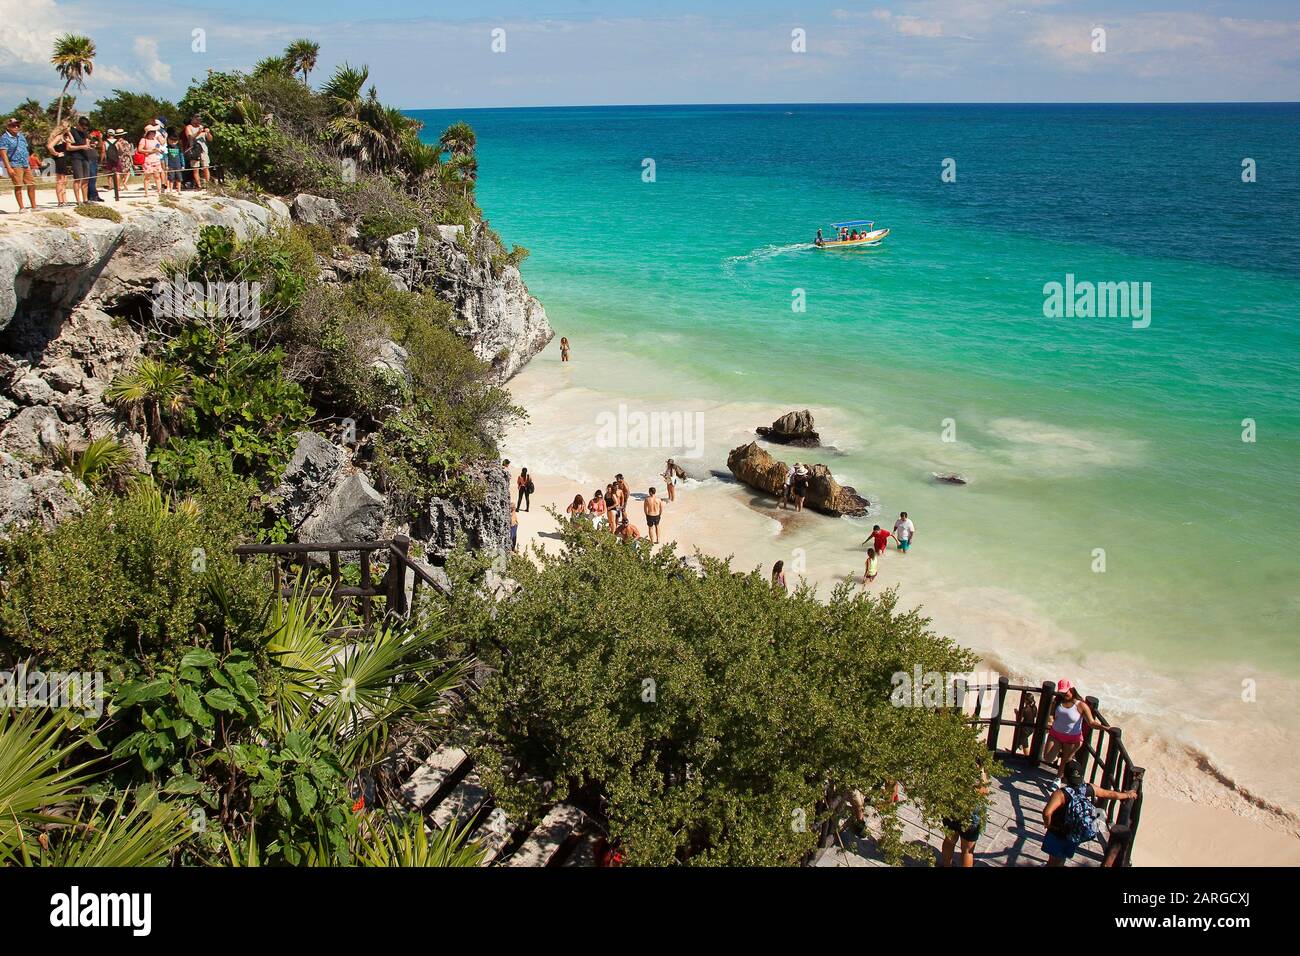 View to the people swimming and sunbathing at the beach close to the Tulum Archaeological Site, Tulum, Quintana Roo, Mexico, Central America Stock Photo